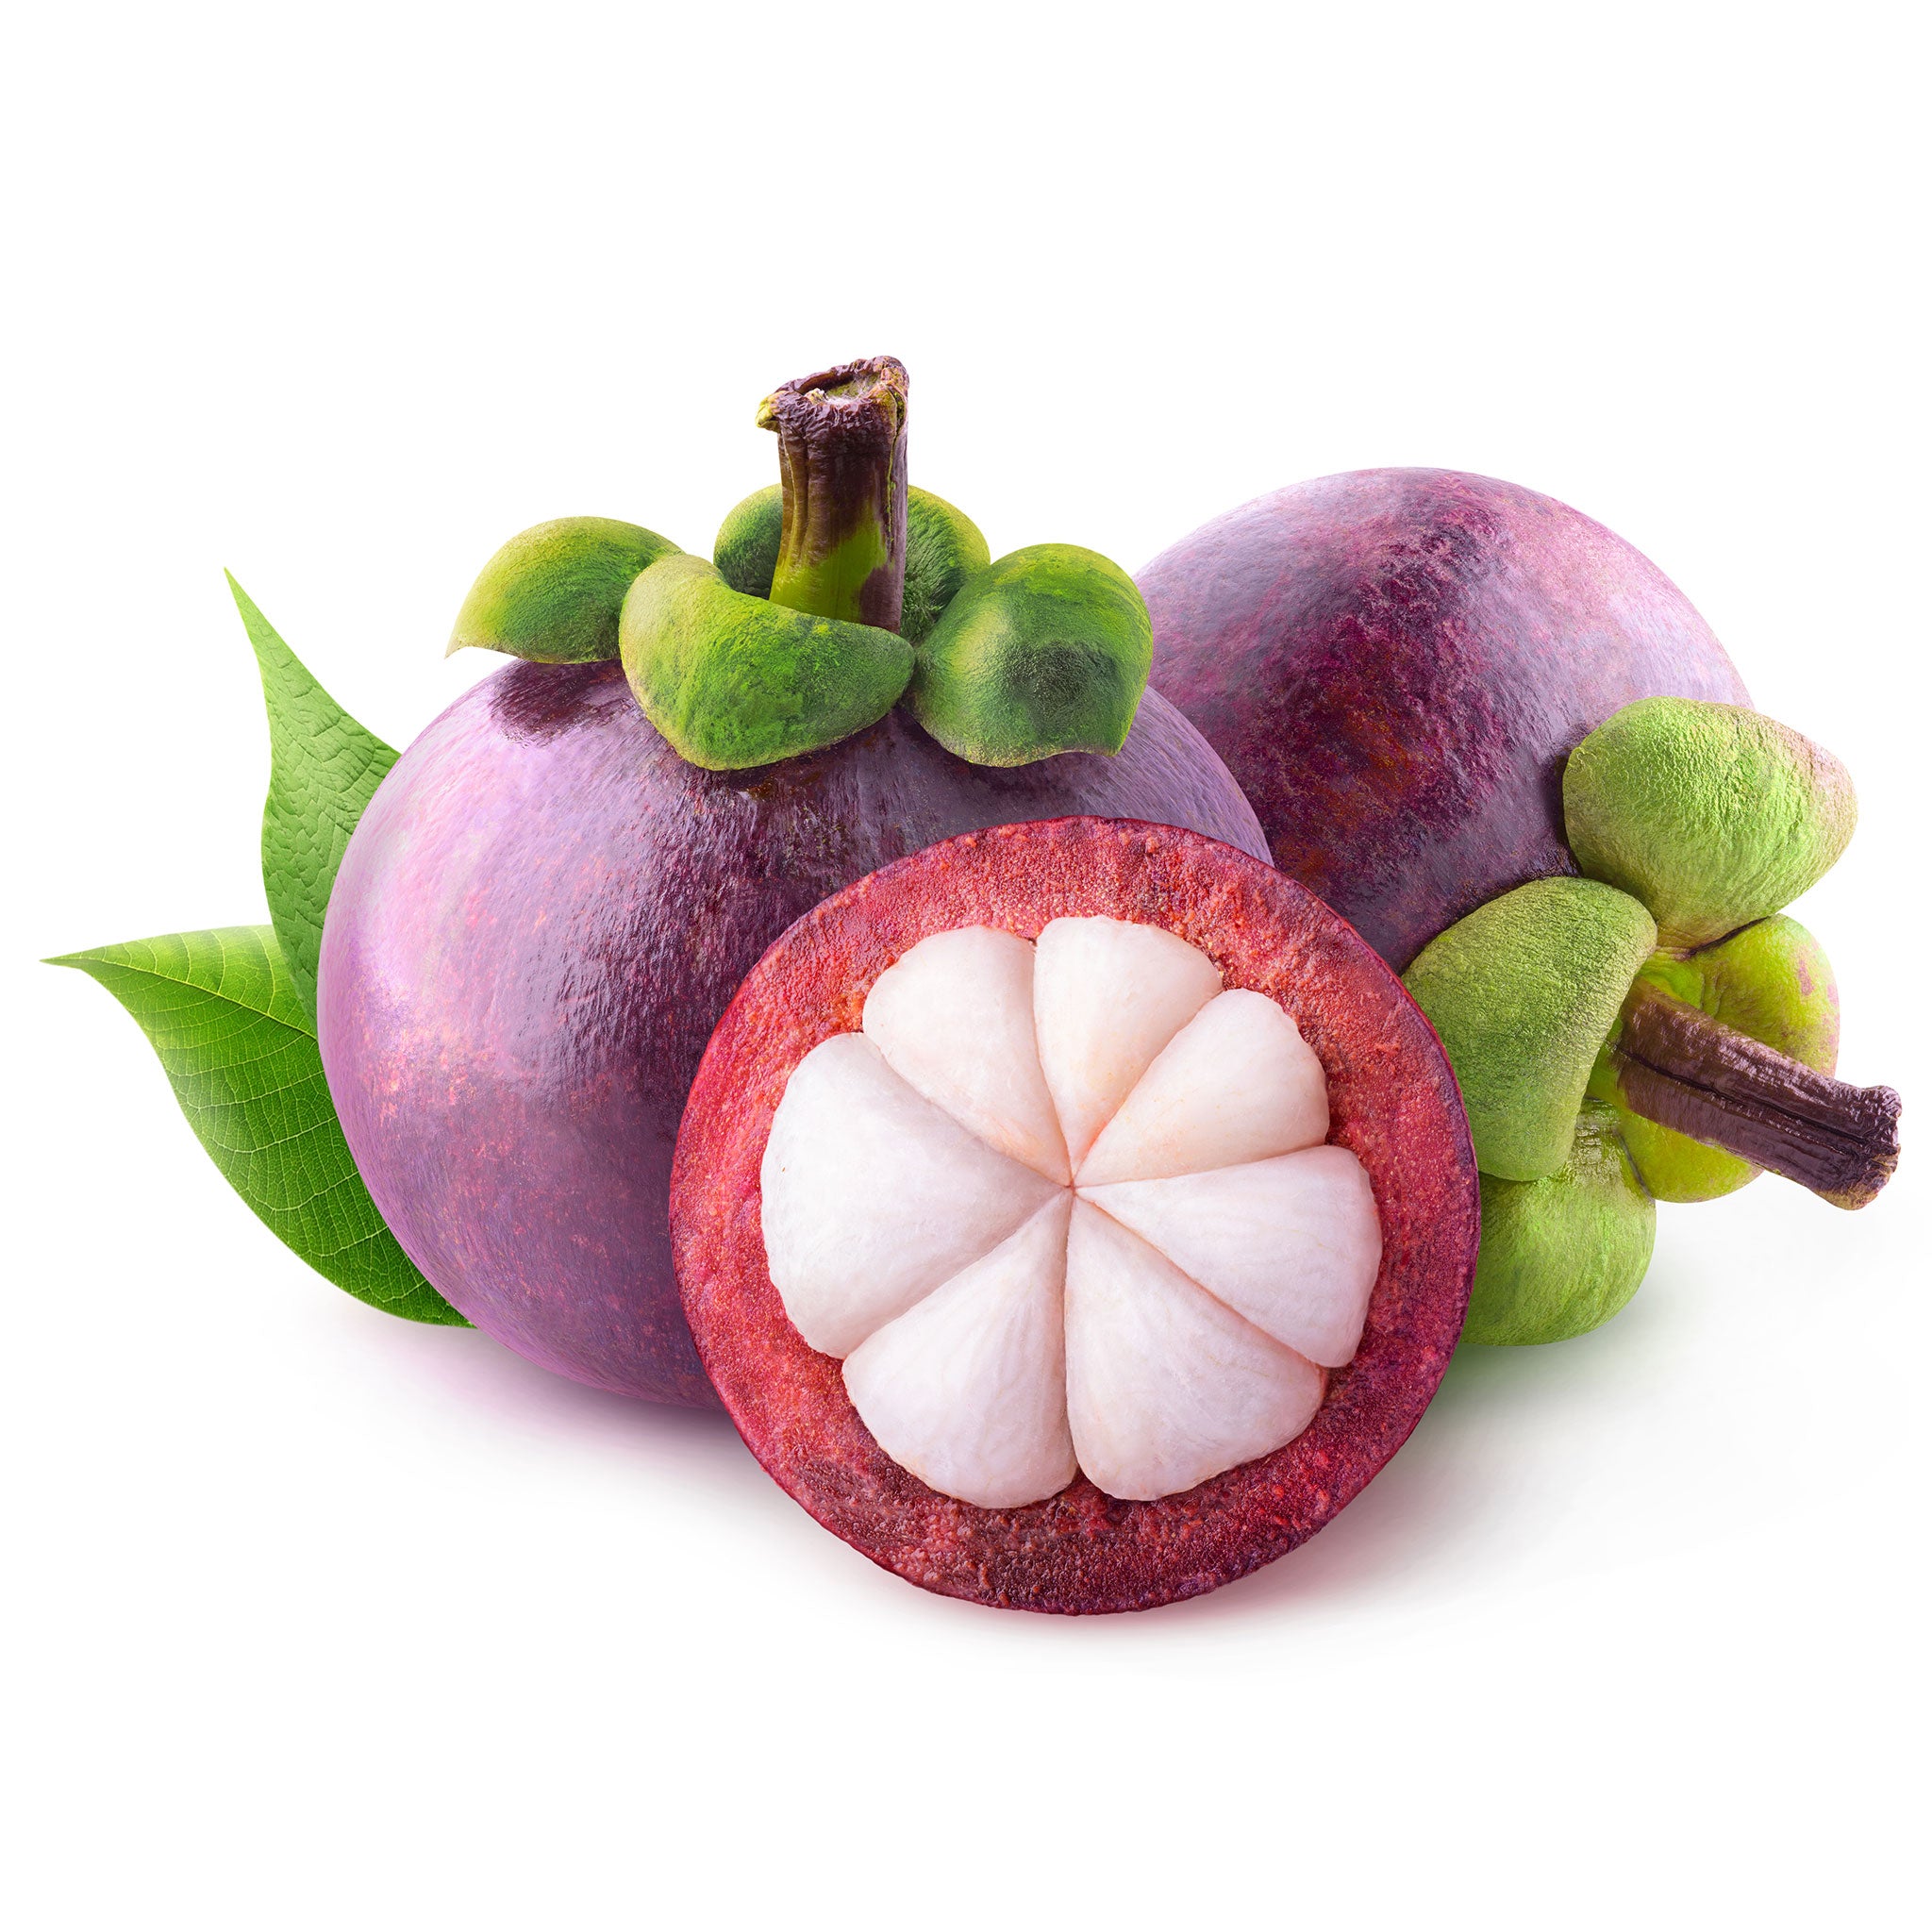 Fresh Thai Mangosteen 500g - Imported Weekly from Thailand